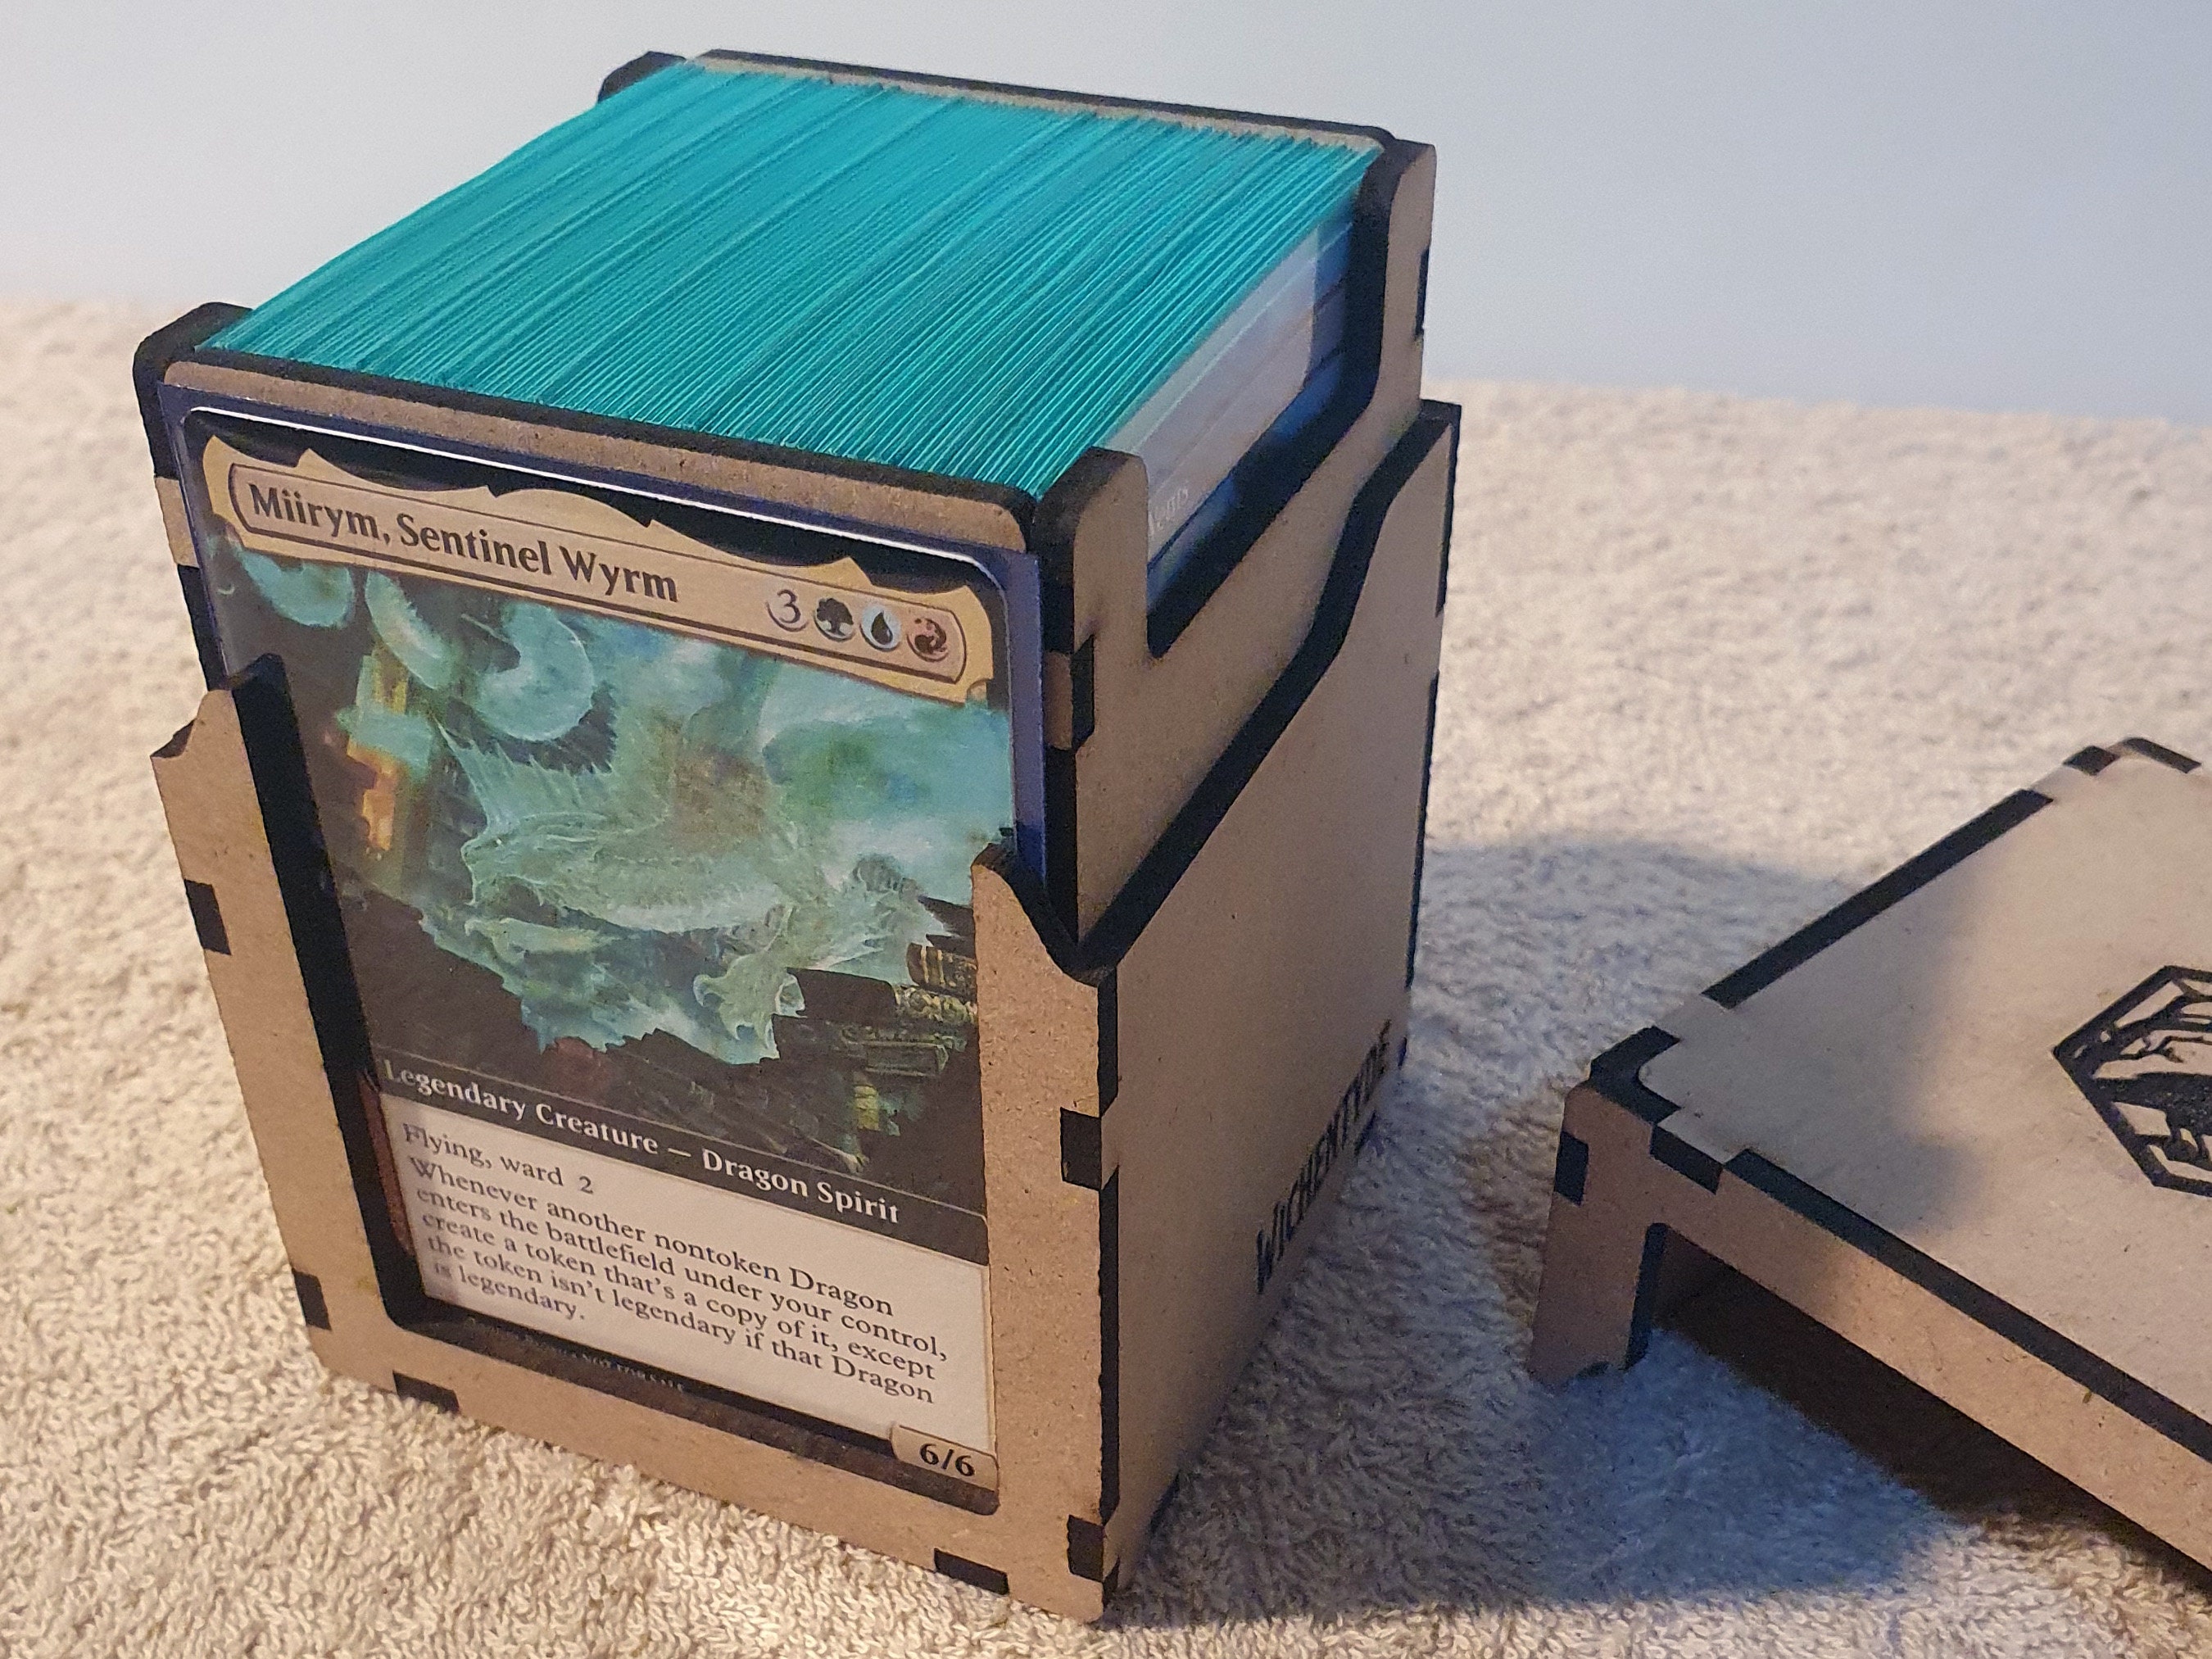 5400 MTG Card Storage Box Painted Black. Suits Magic the Gathering, Pokemon  and Yugioh. Fits Sleeves, Top Loaders and Most Deck Boxes. 